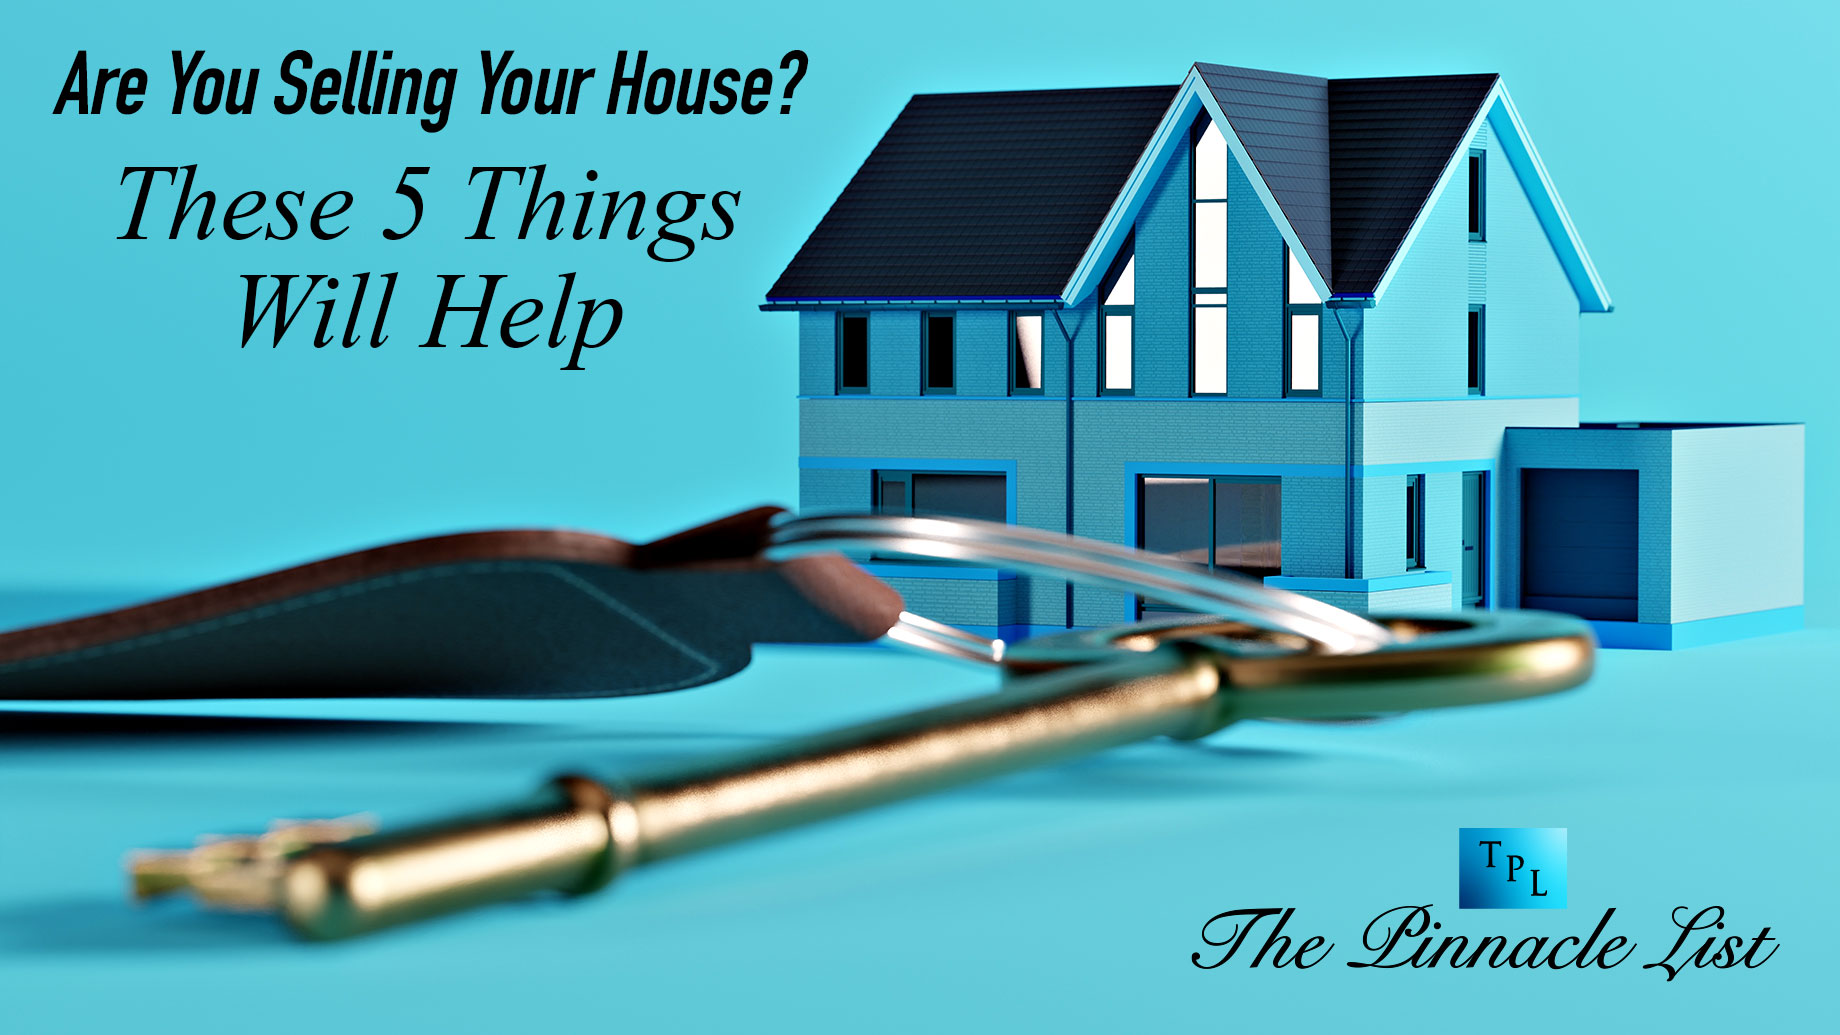 Are You Selling Your House? These 5 Things Will Help